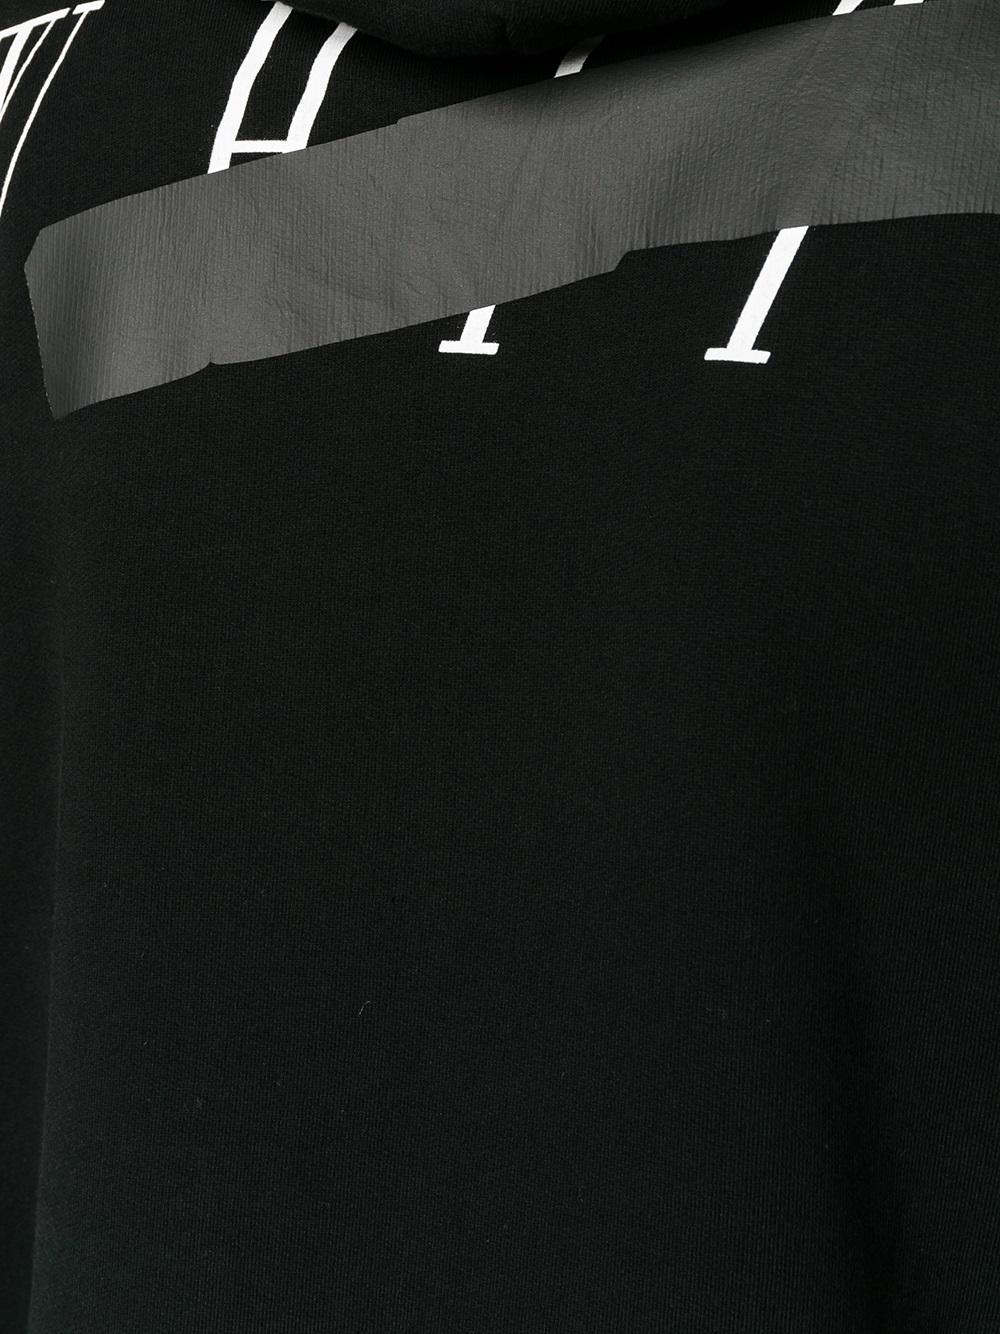 Off-White c/o Virgil Abloh Cotton Rock Mirror Hoodie in Black for 